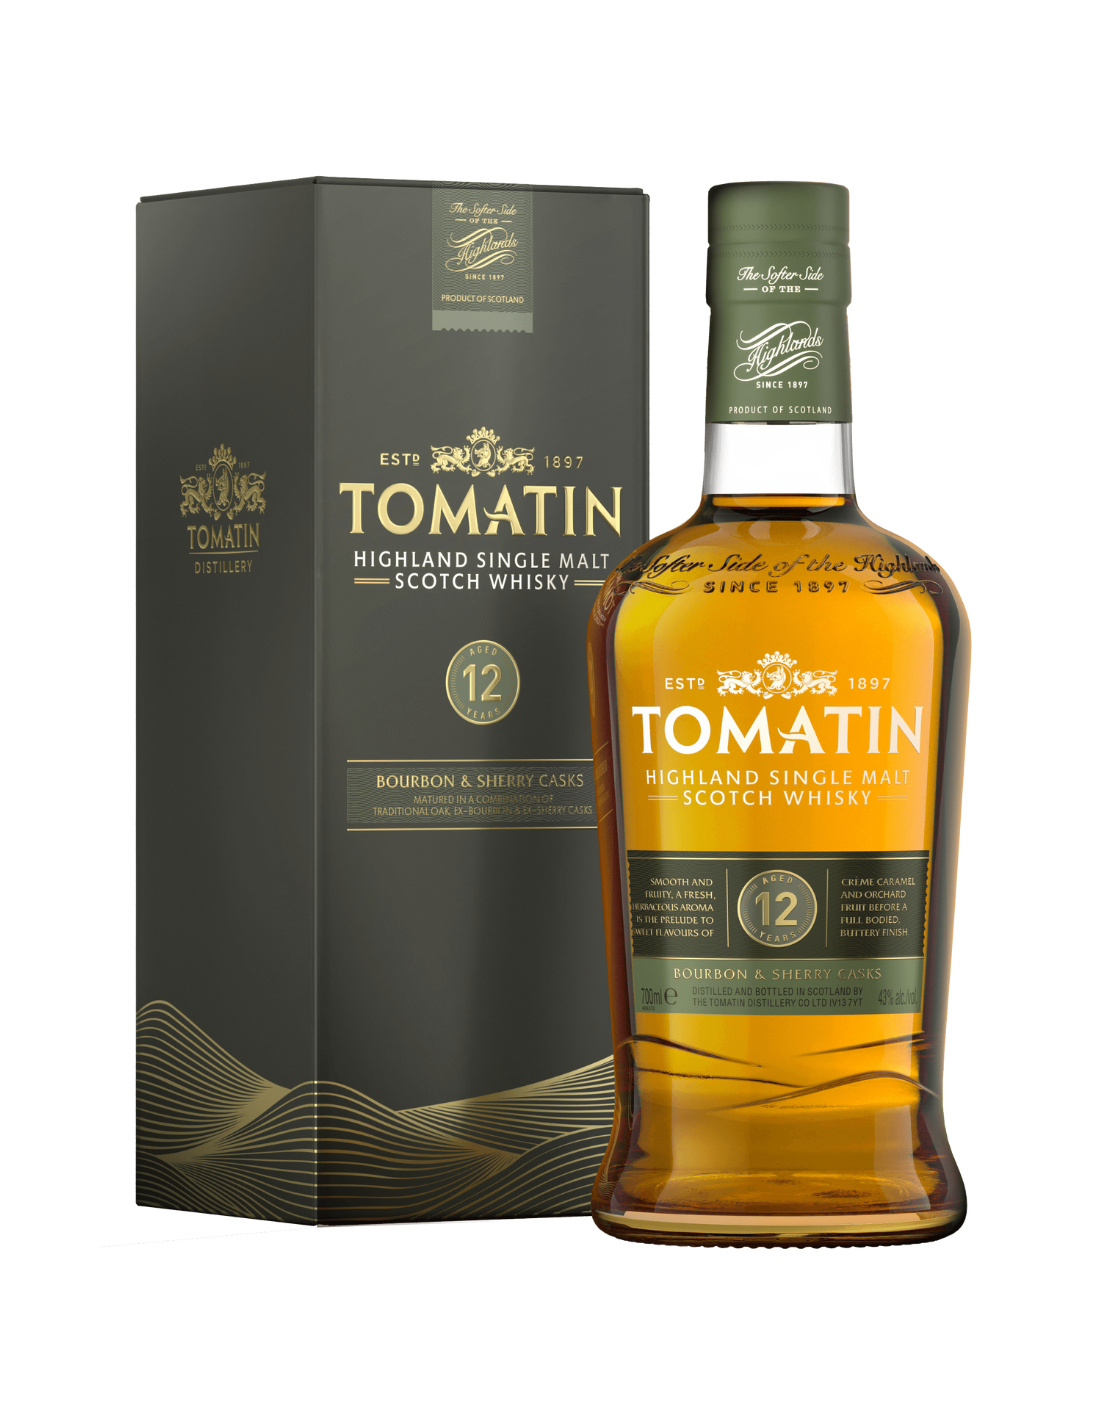 Whisky Tomatin 12 Years, 0.7L, 43% alc., Scotia